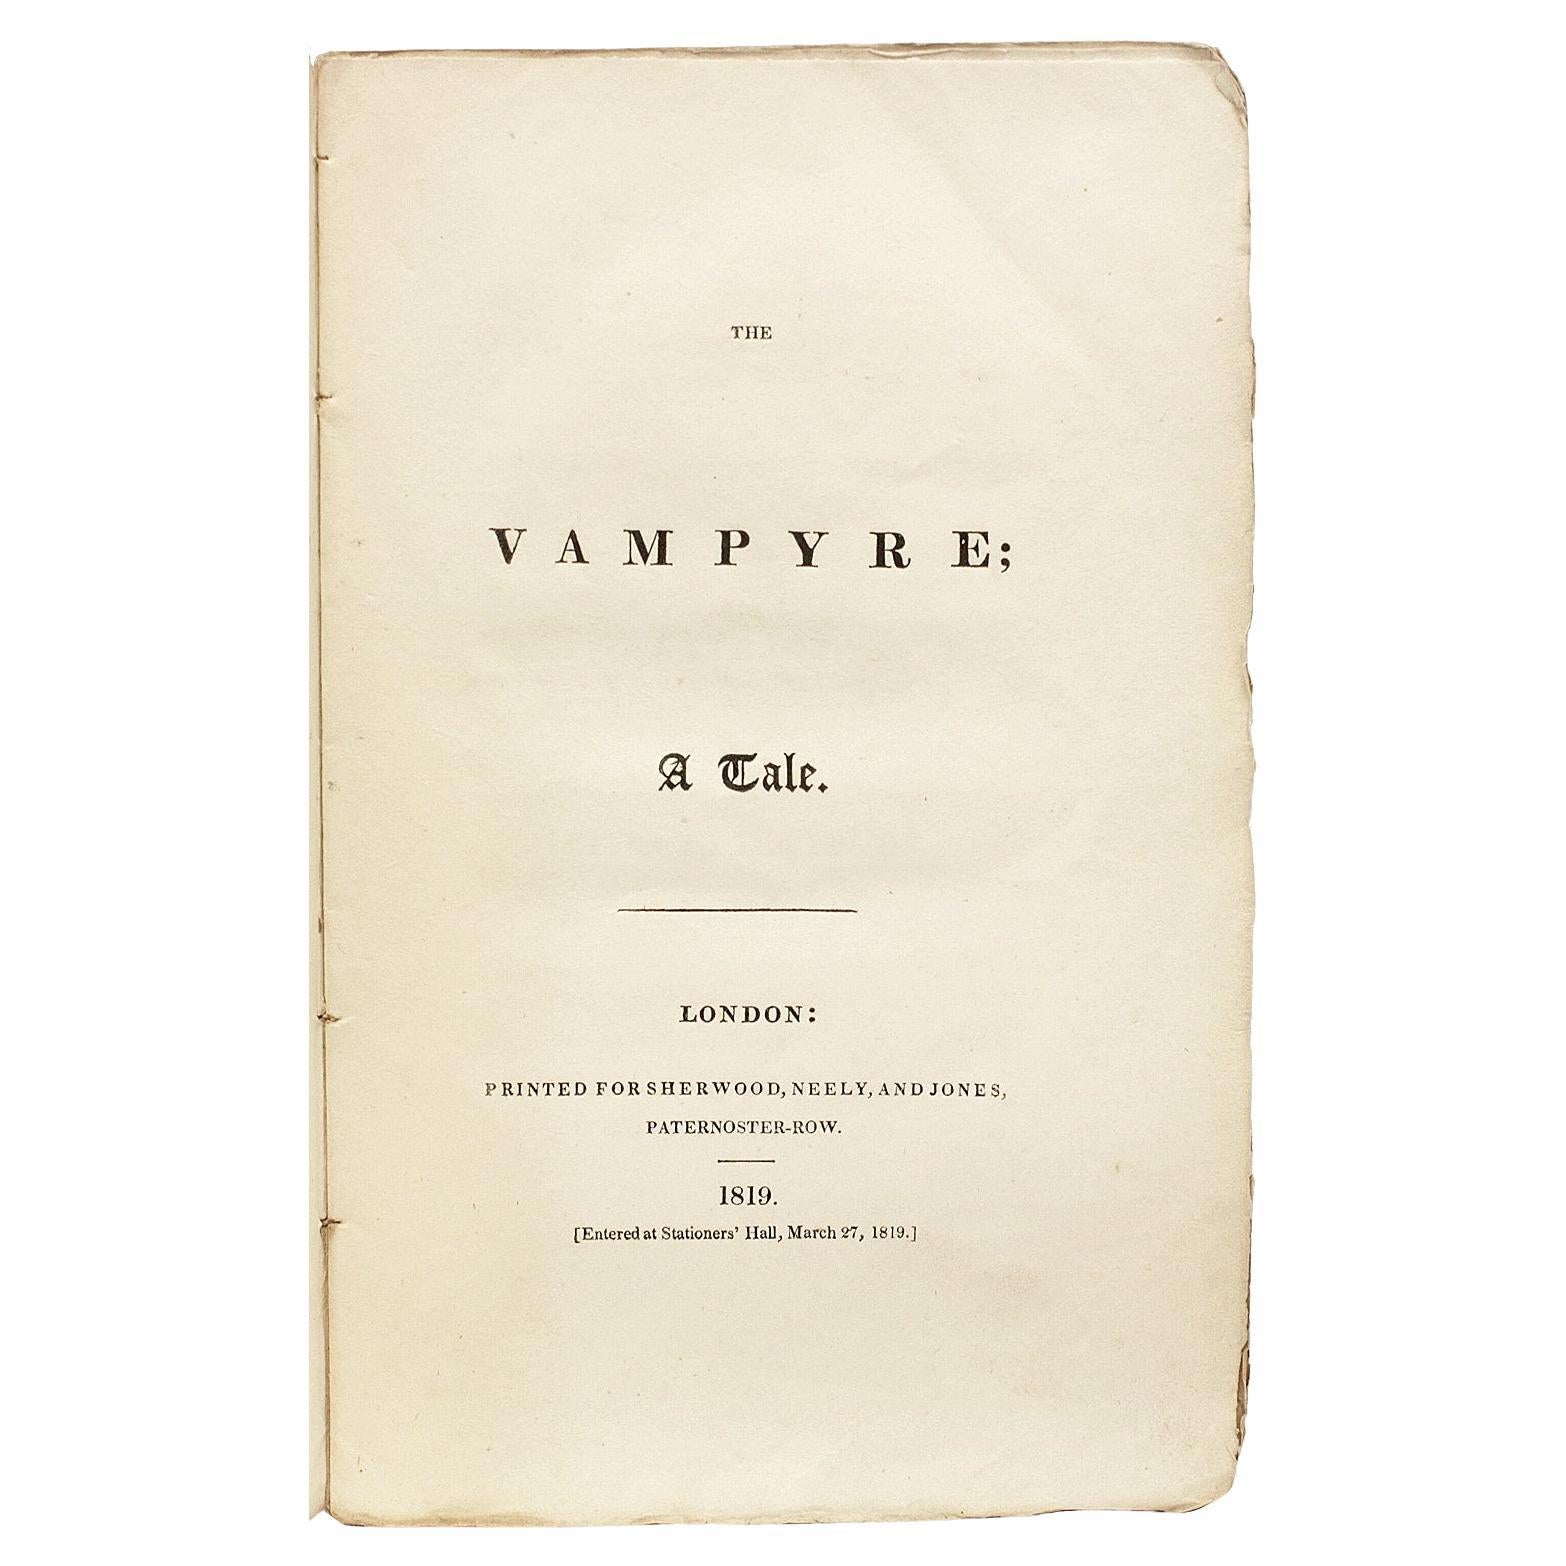 POLIDORI - The Vampyre - 1819 - FIRST EDITION - THE EARLIEST OBTAINABLE ISSUE